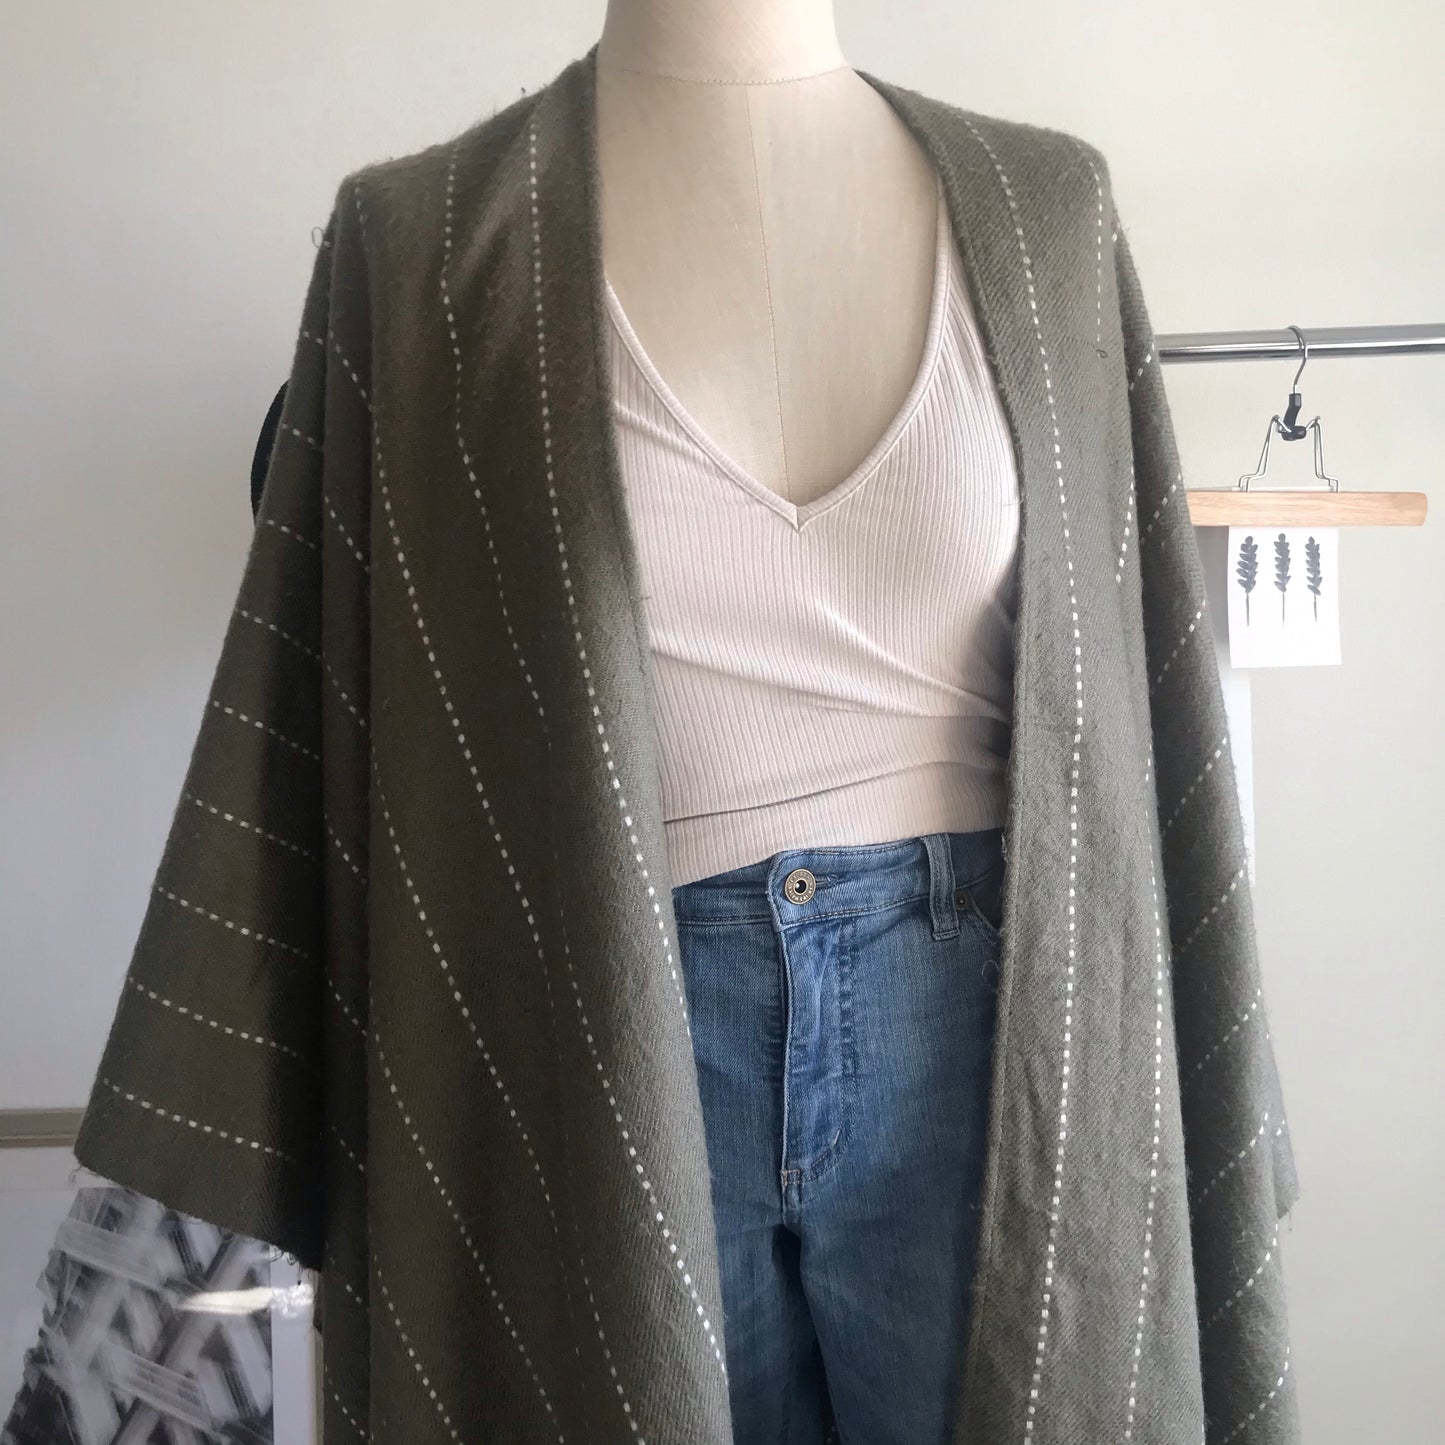 Olive green and white striped poncho. One size.